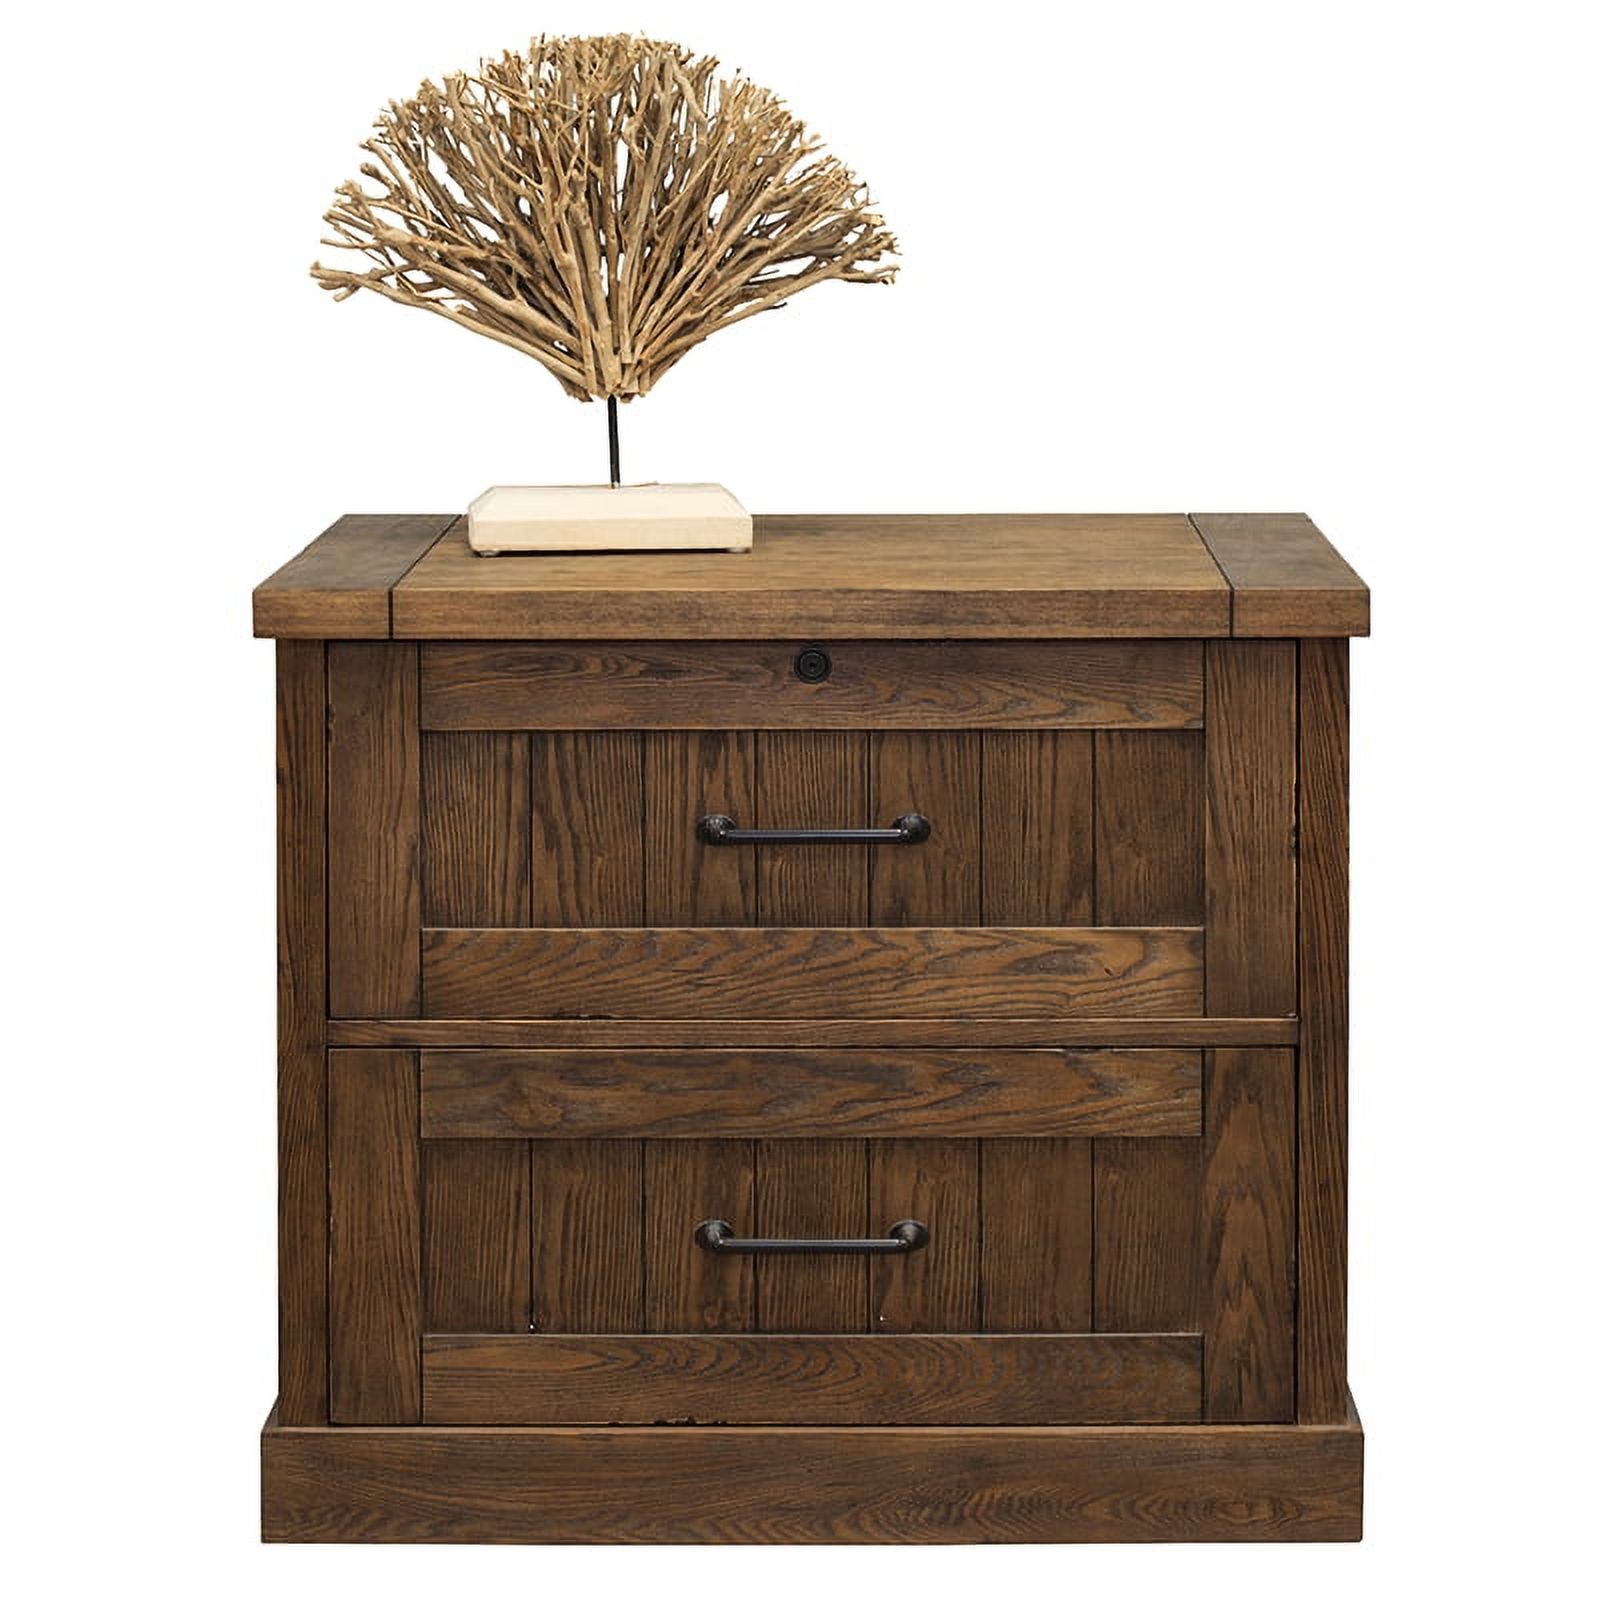 Avondale Wood Lateral File With Locking File Drawer Fully Assembled Brown - image 1 of 6